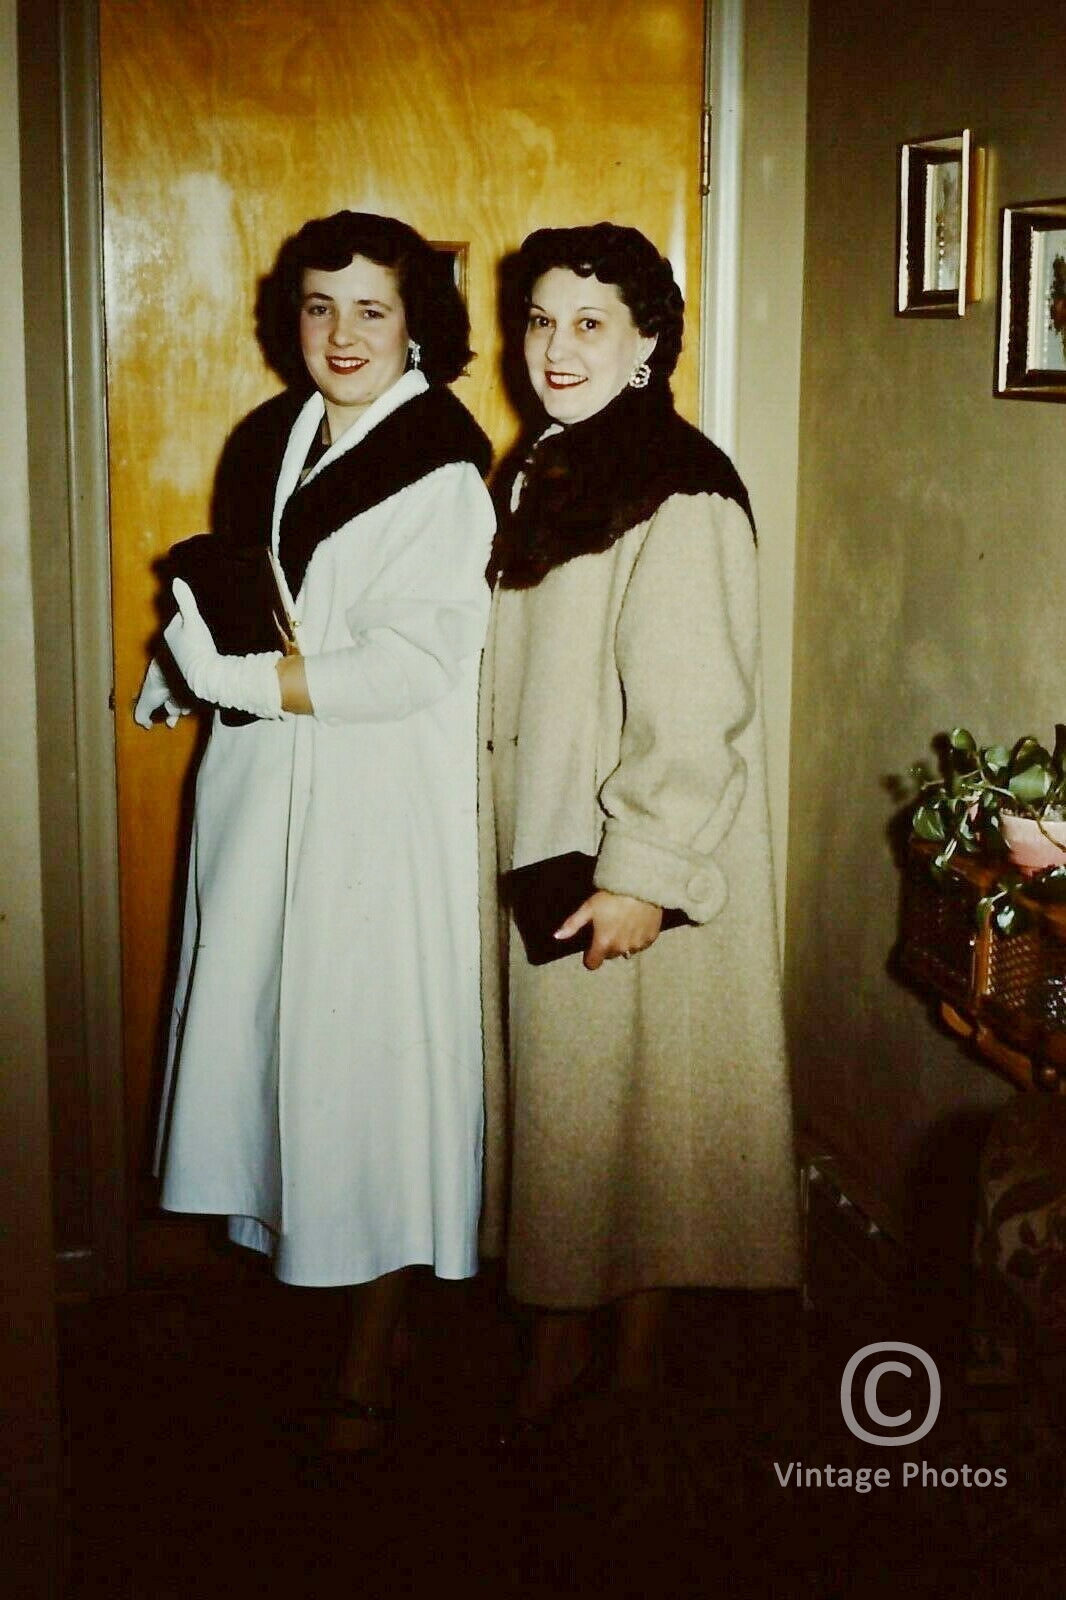 1960s American Fashion, Mother and Daughter Wearing Coats